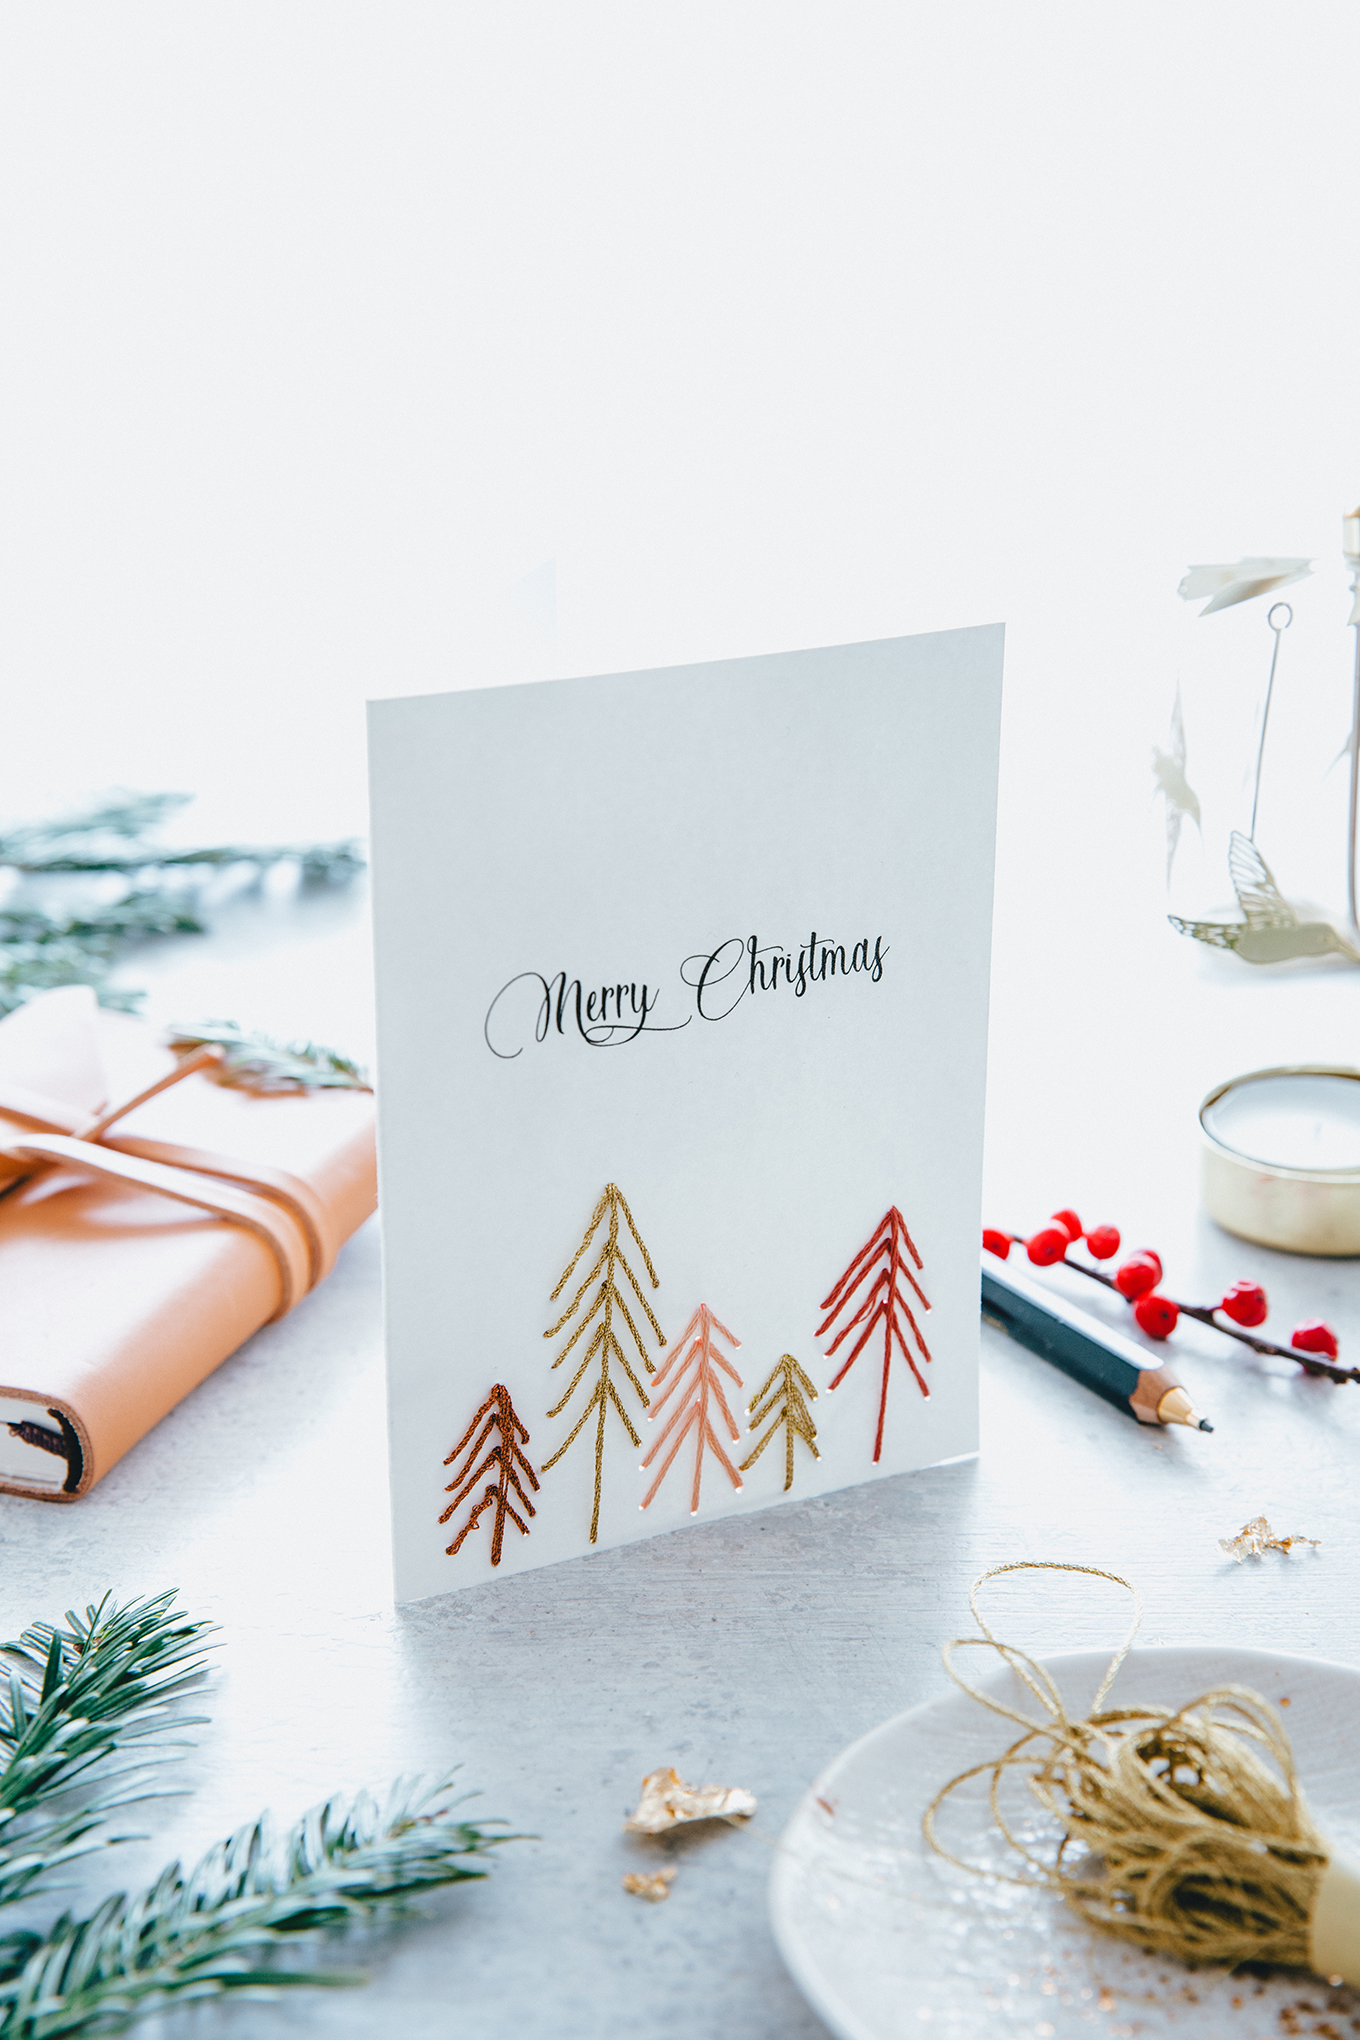 Embroided holiday card - Carnets Parisiens